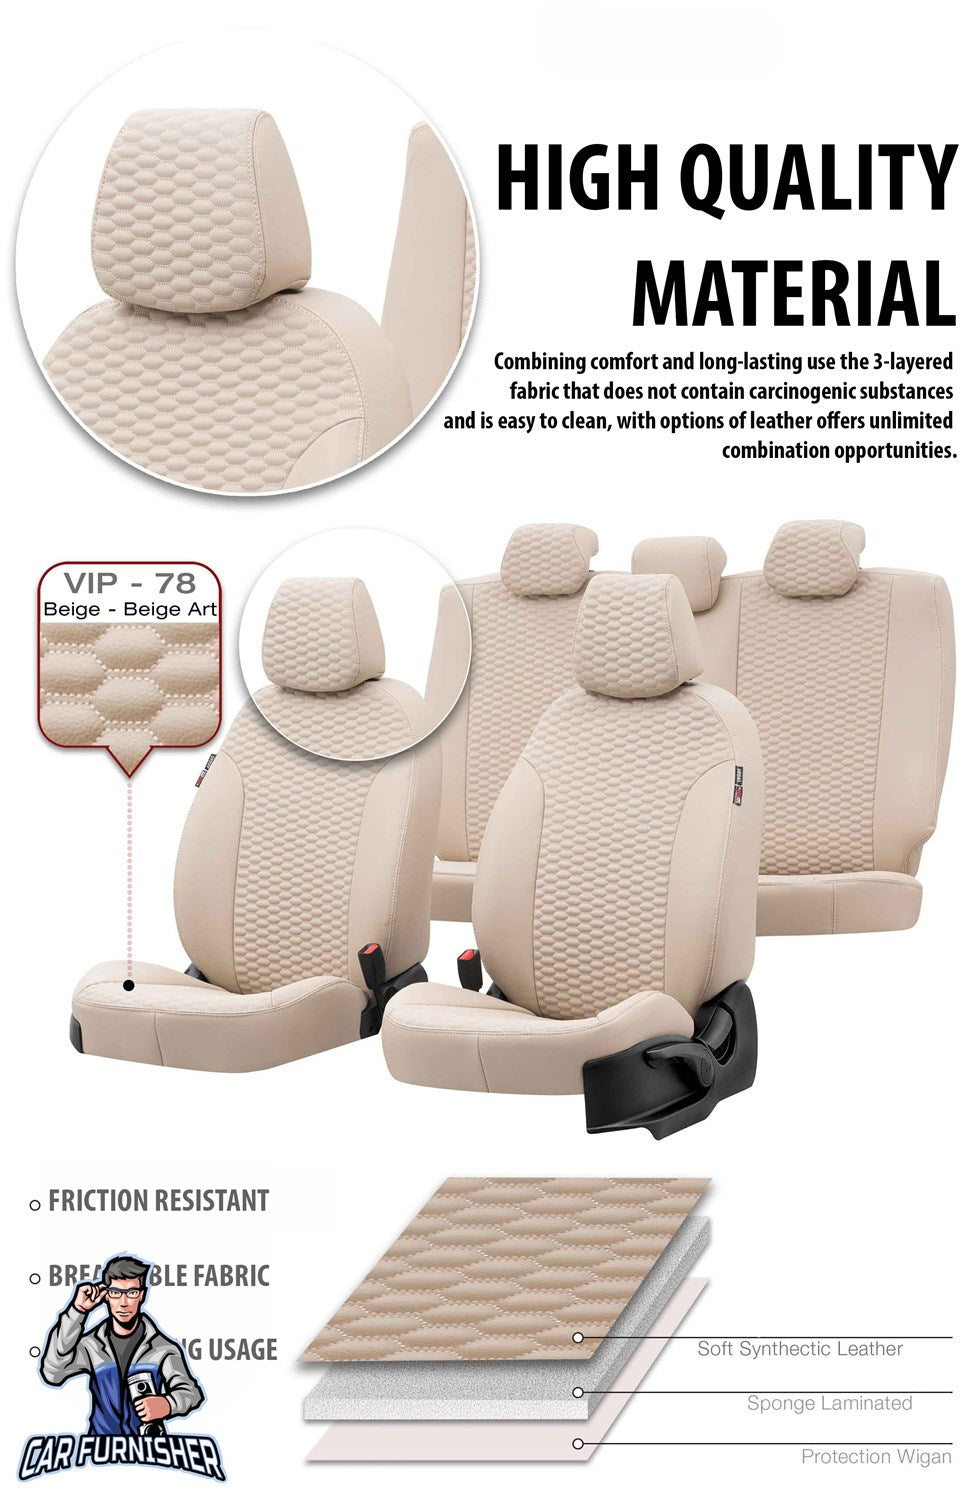 Mitsubishi Attrage Seat Covers Tokyo Leather Design Smoked Leather